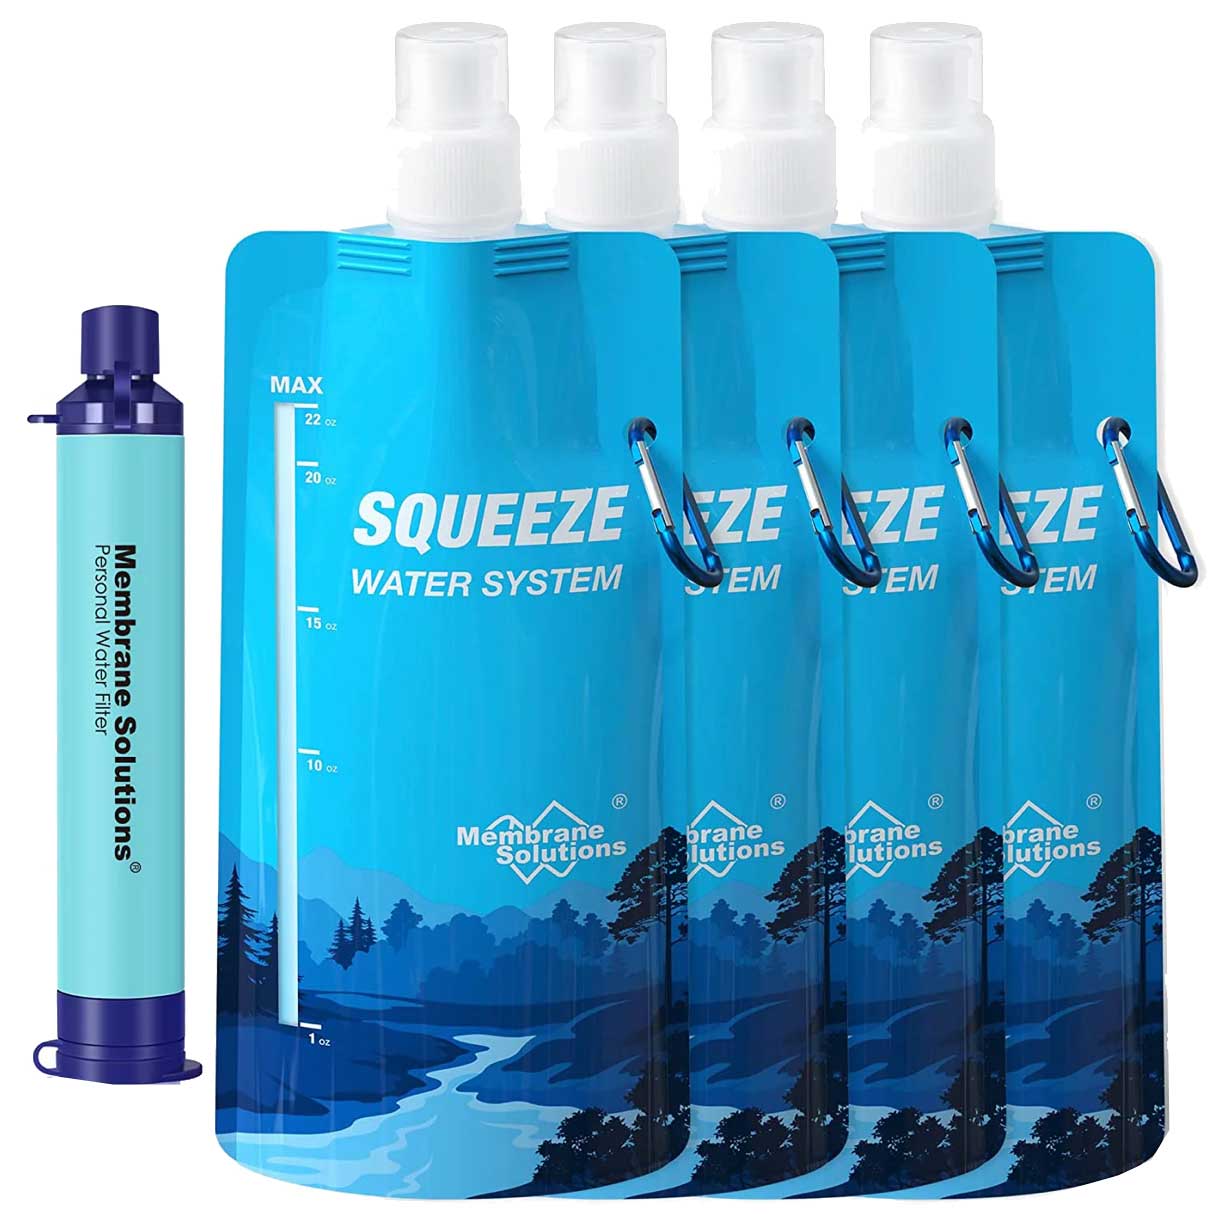 image membrane-solutions-squeeze-water-system-jpg